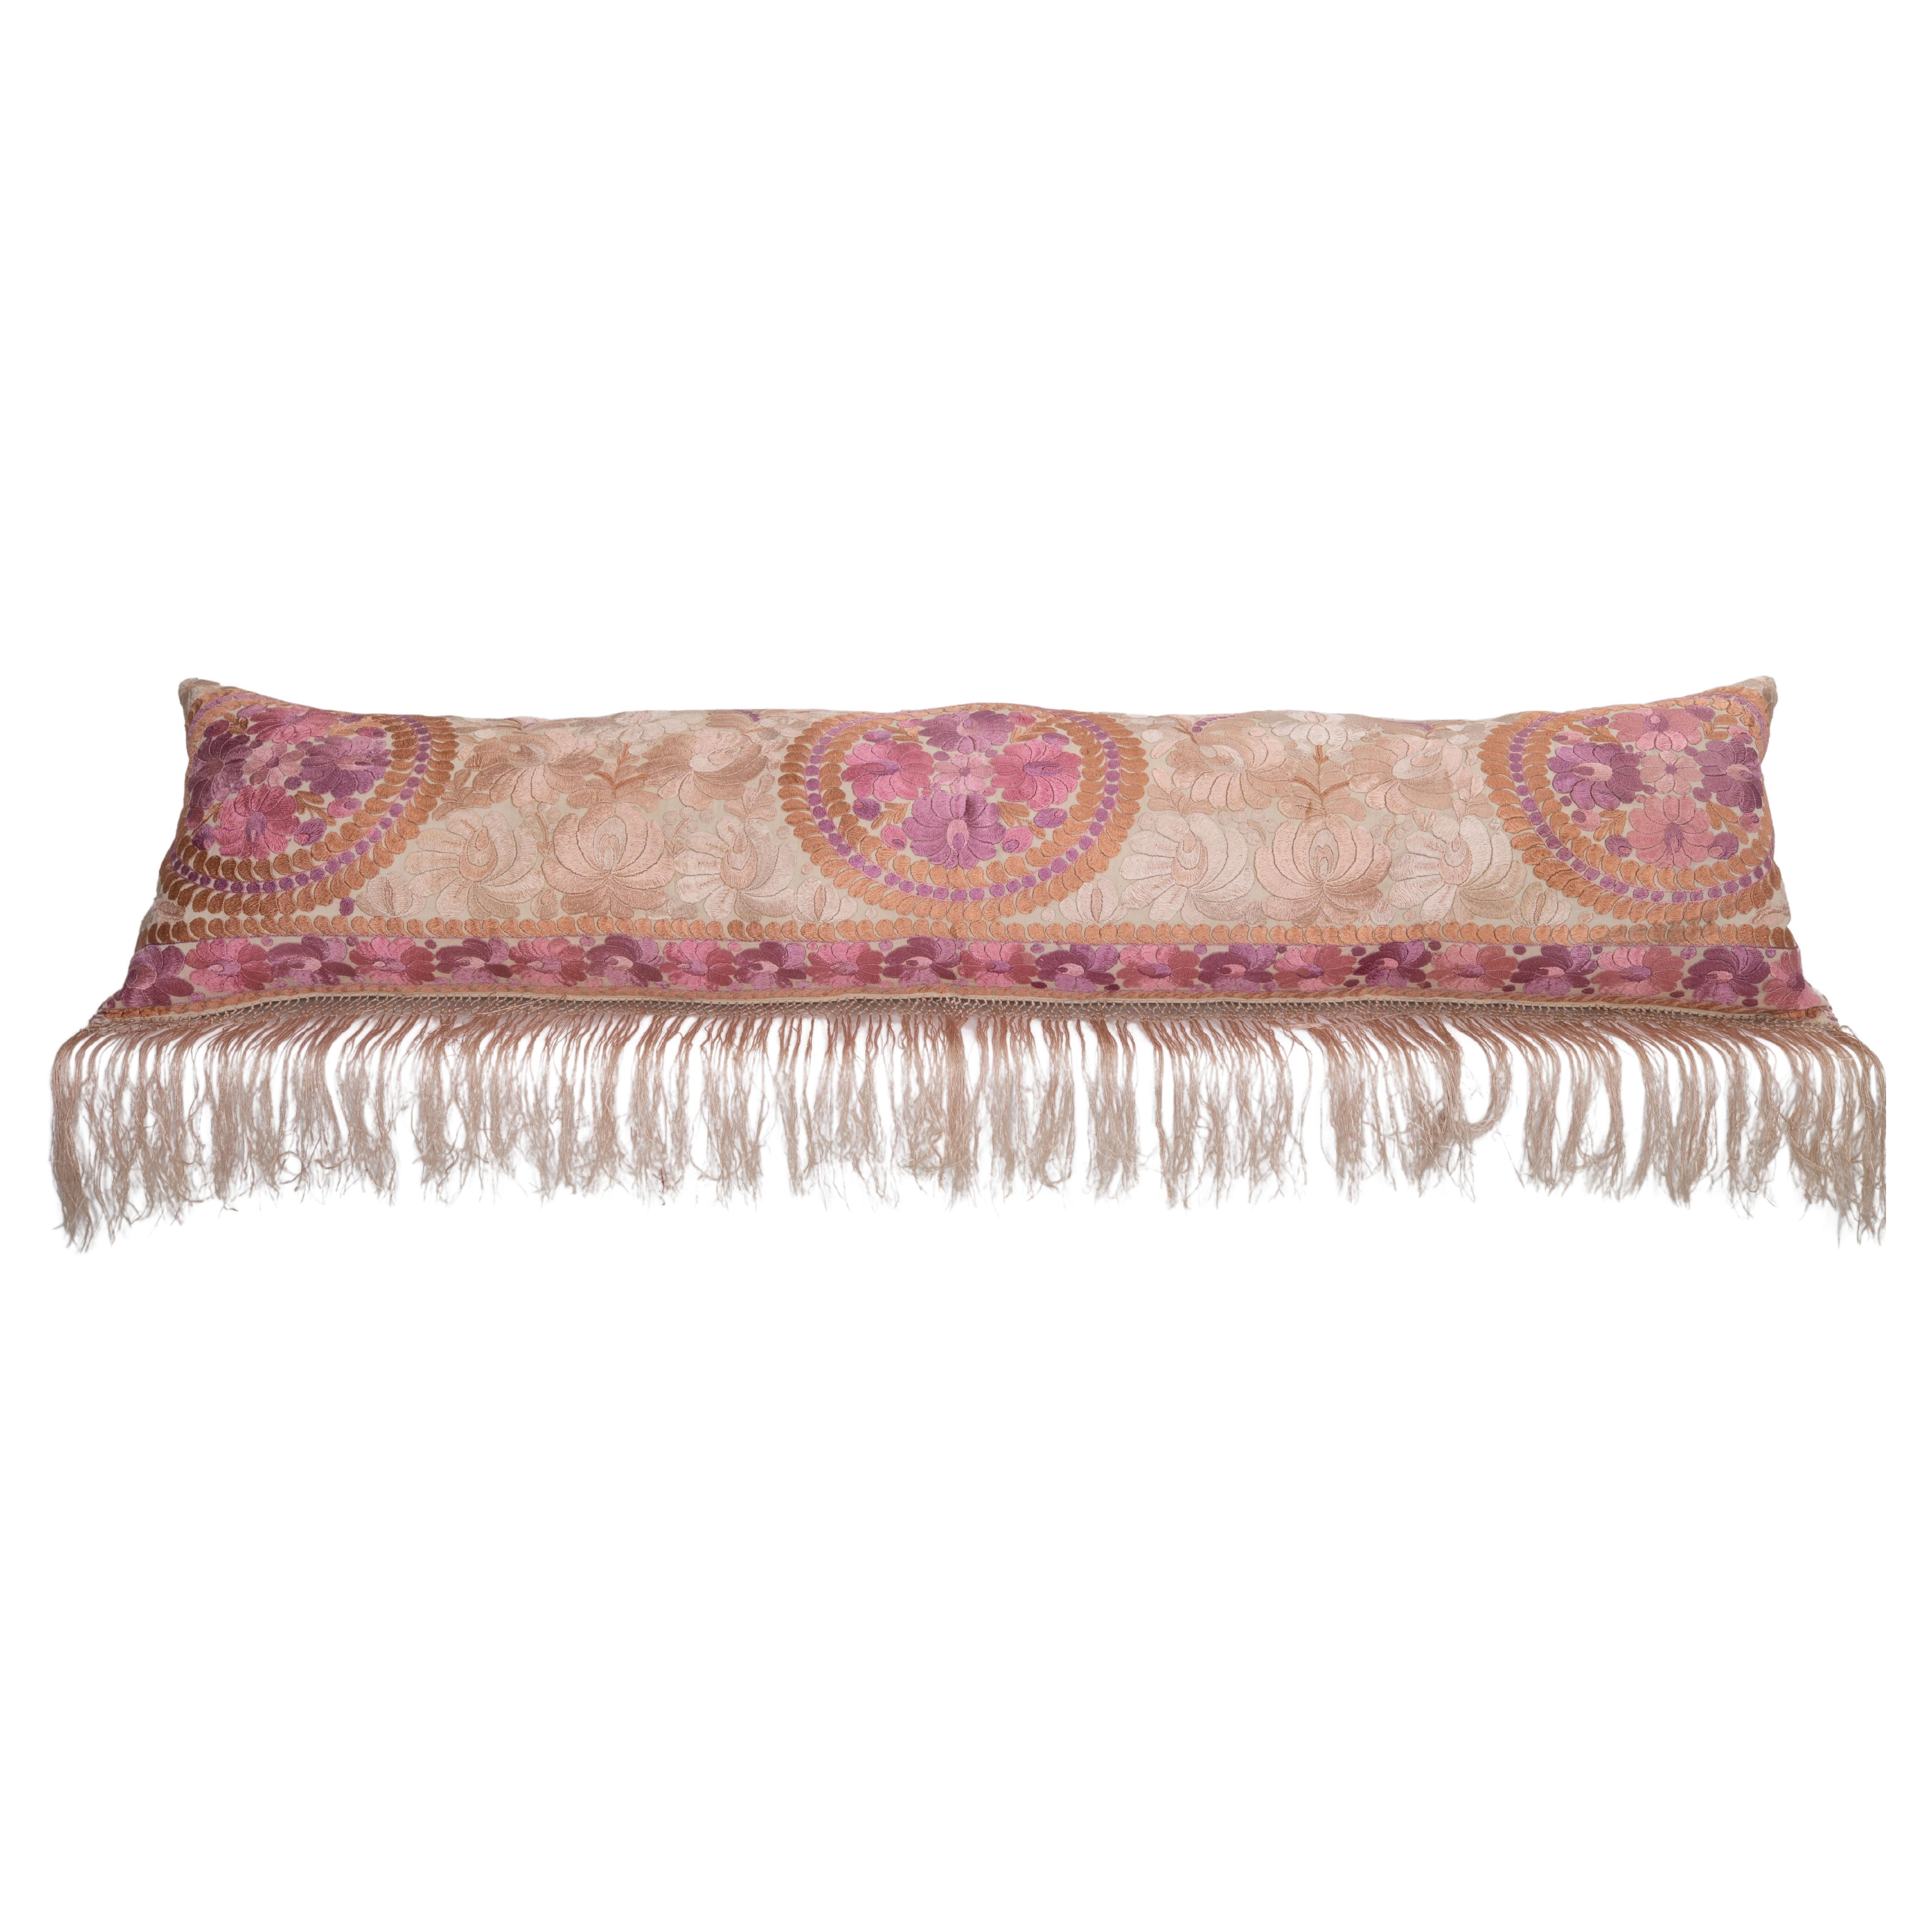 XXXL Body Pillow Cover Fashioned from  a Hungarian Matyo Embroidery For Sale